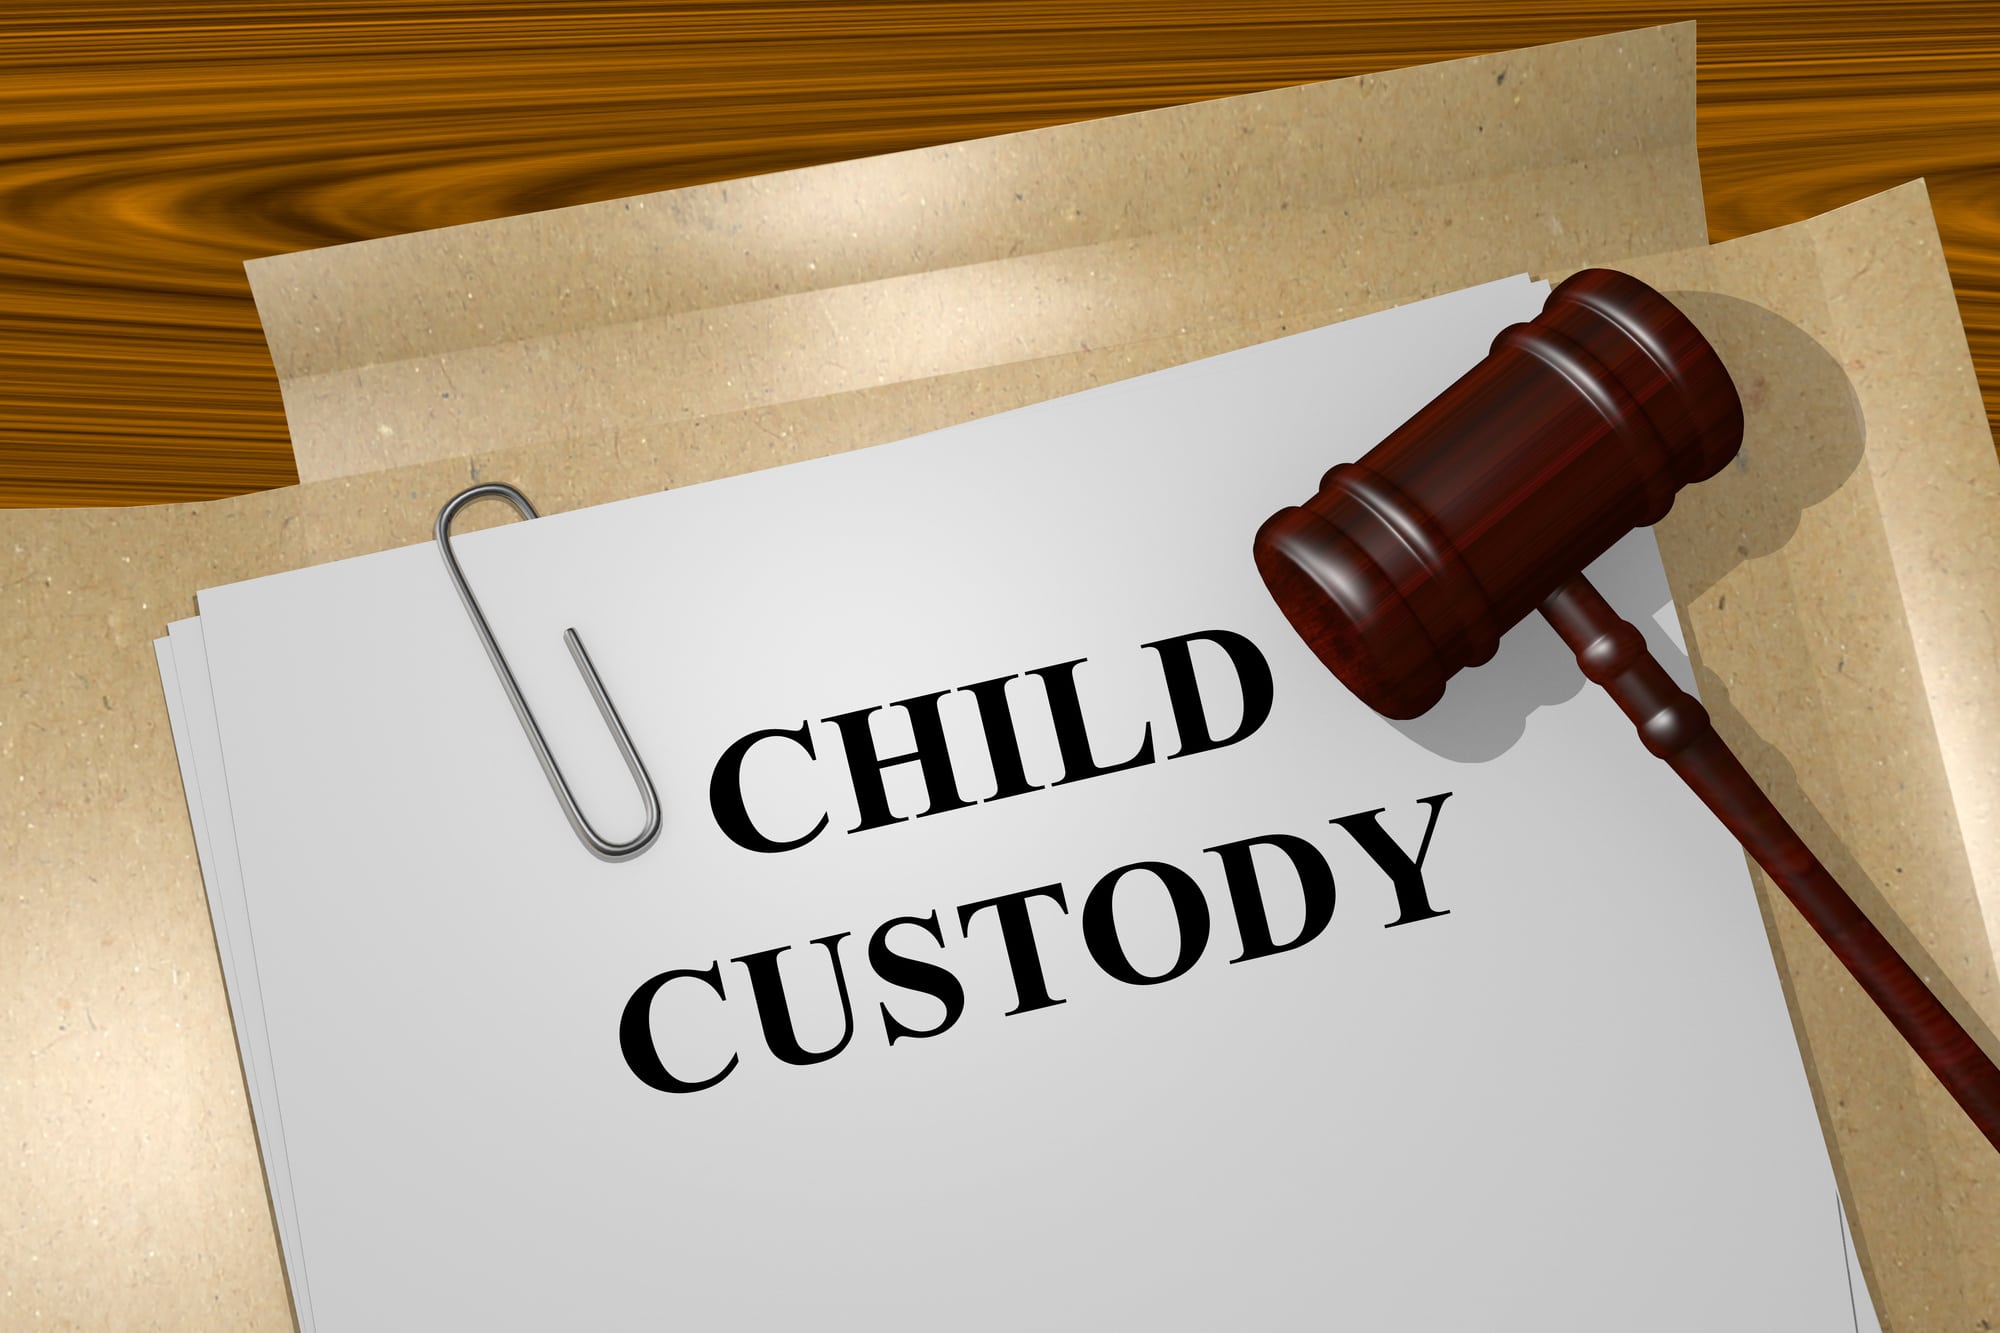 questions to ask a lawyer about child custody